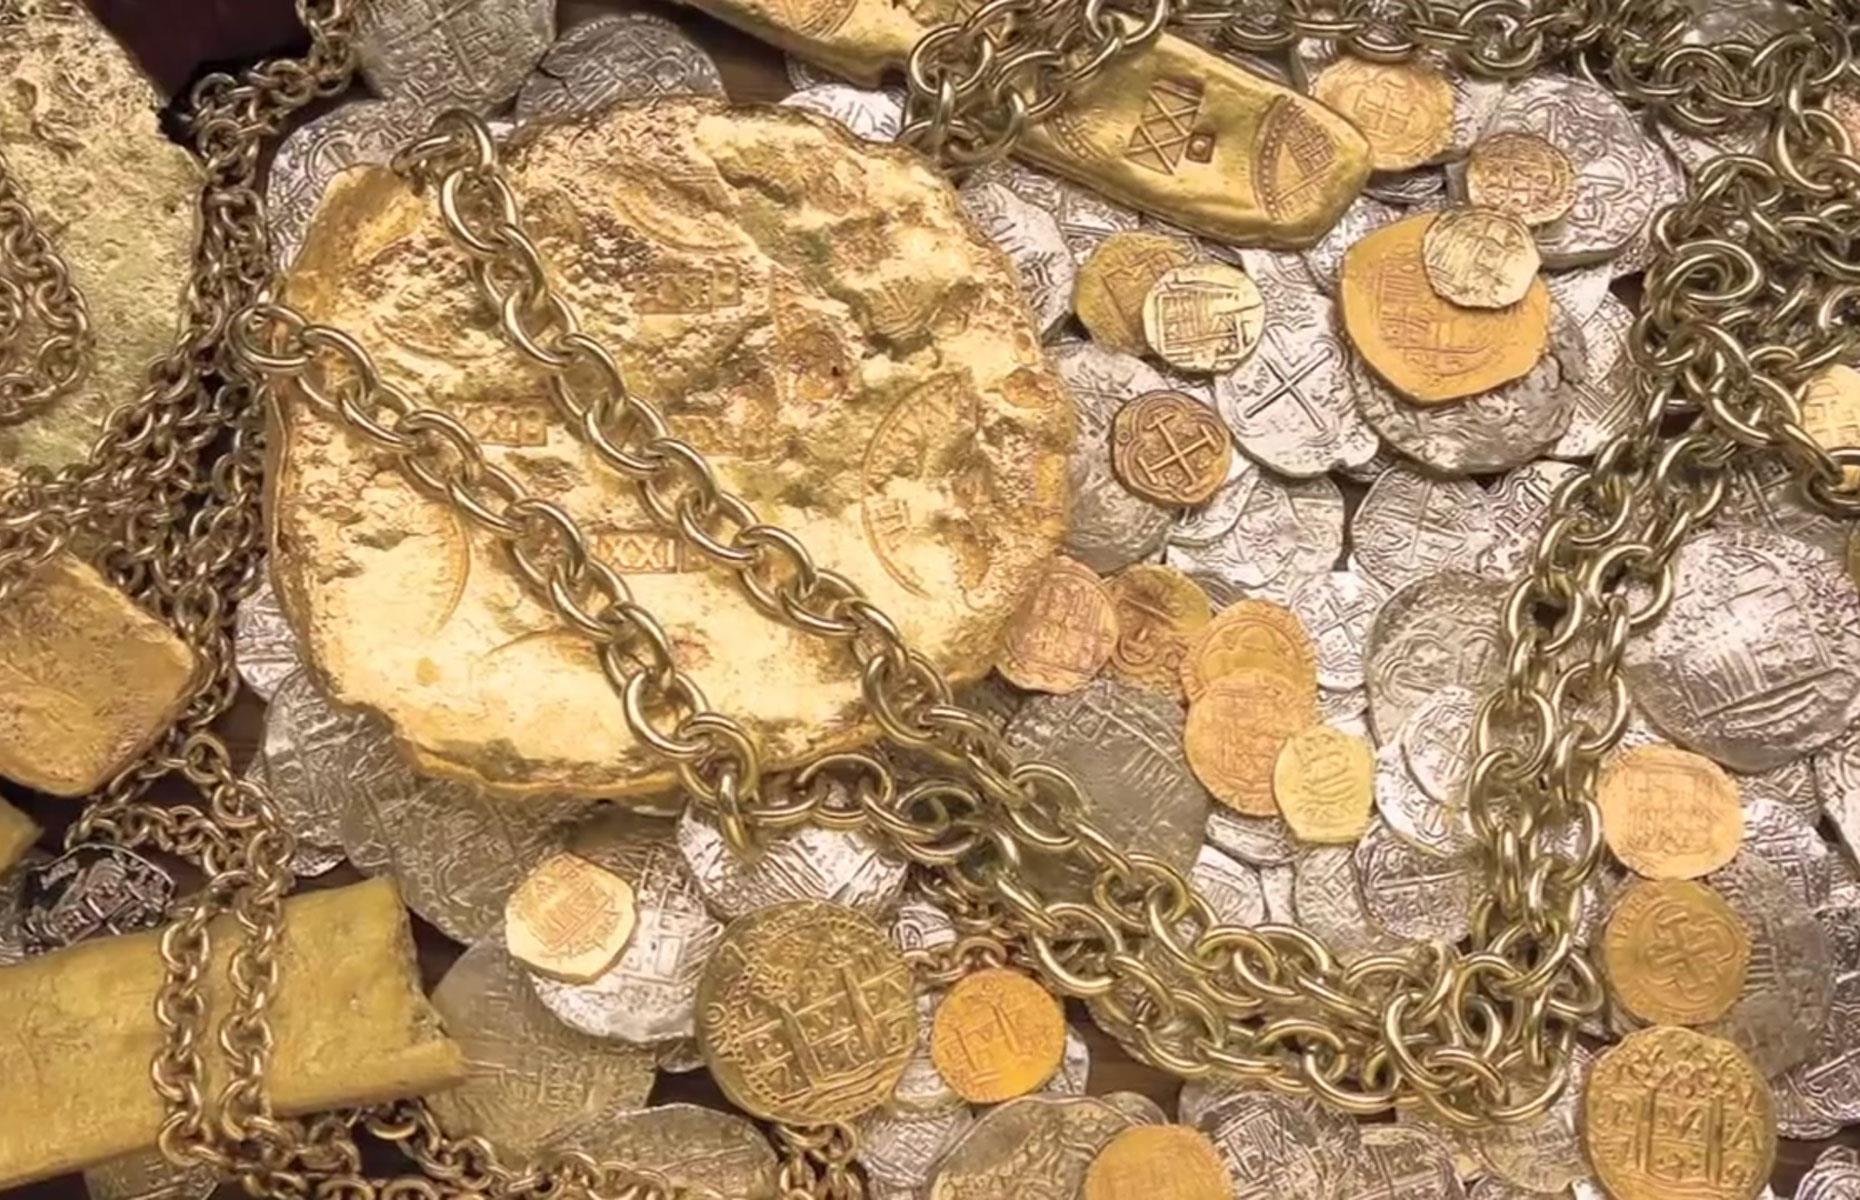 A treasure hunter claims he has found a lost gold mine worth $1.7 billion that was first discovered by Spanish priests in 1650